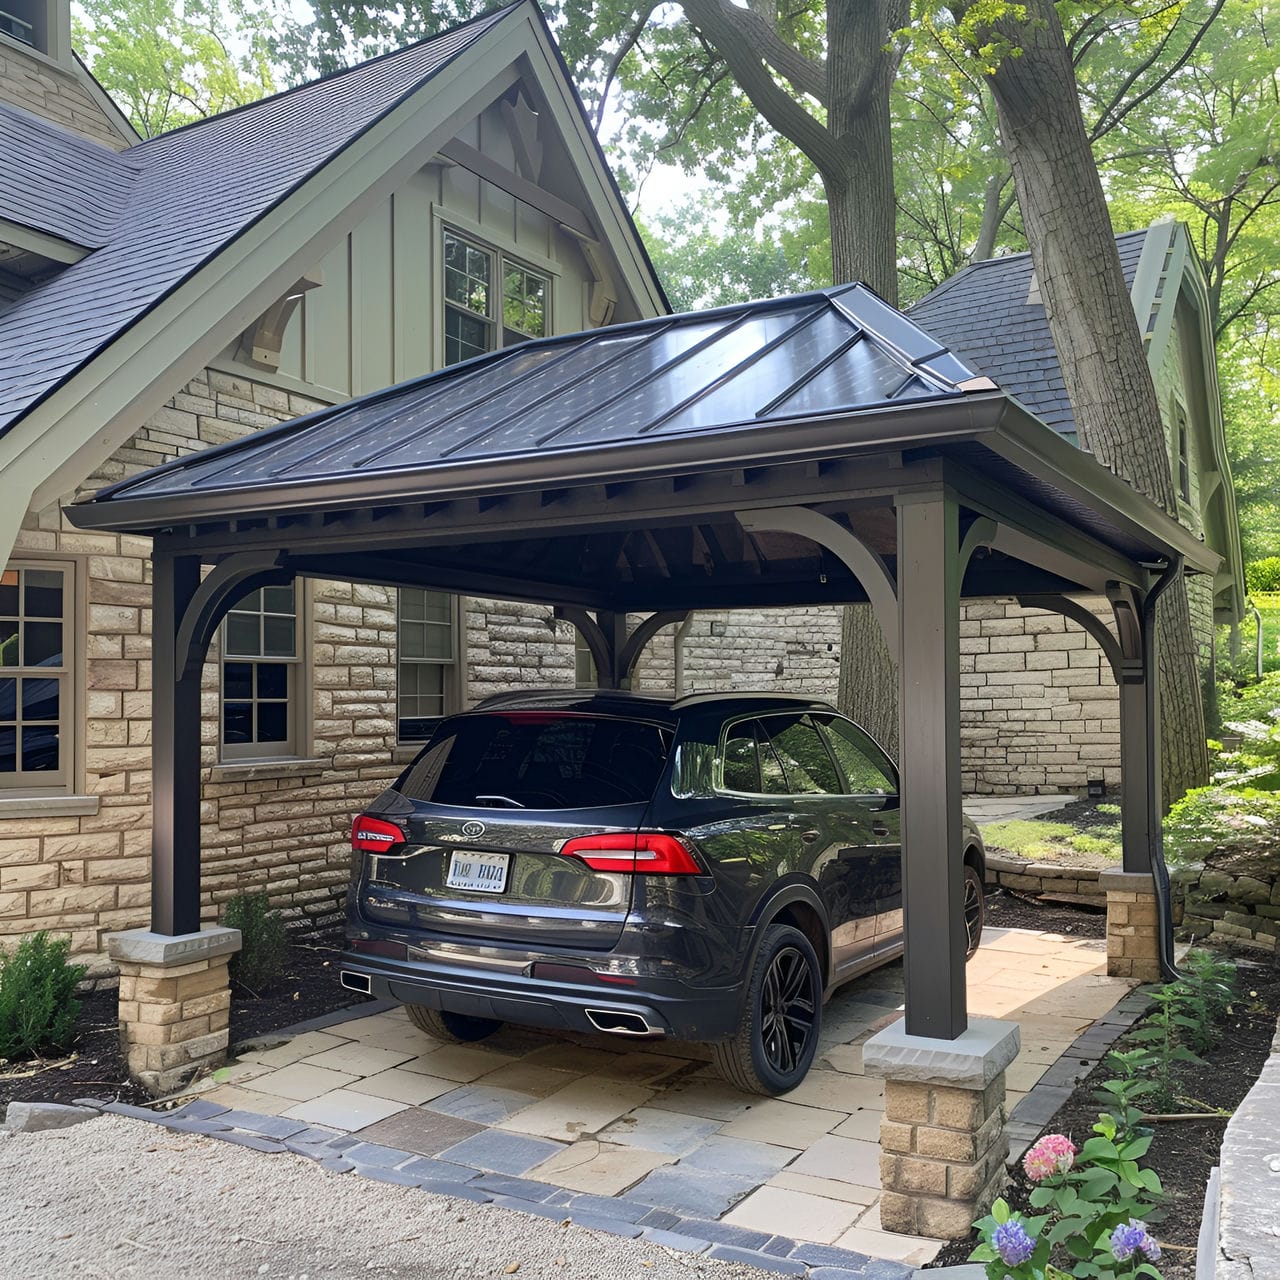 Carport: size, functionality, uses, furniture, and renovation